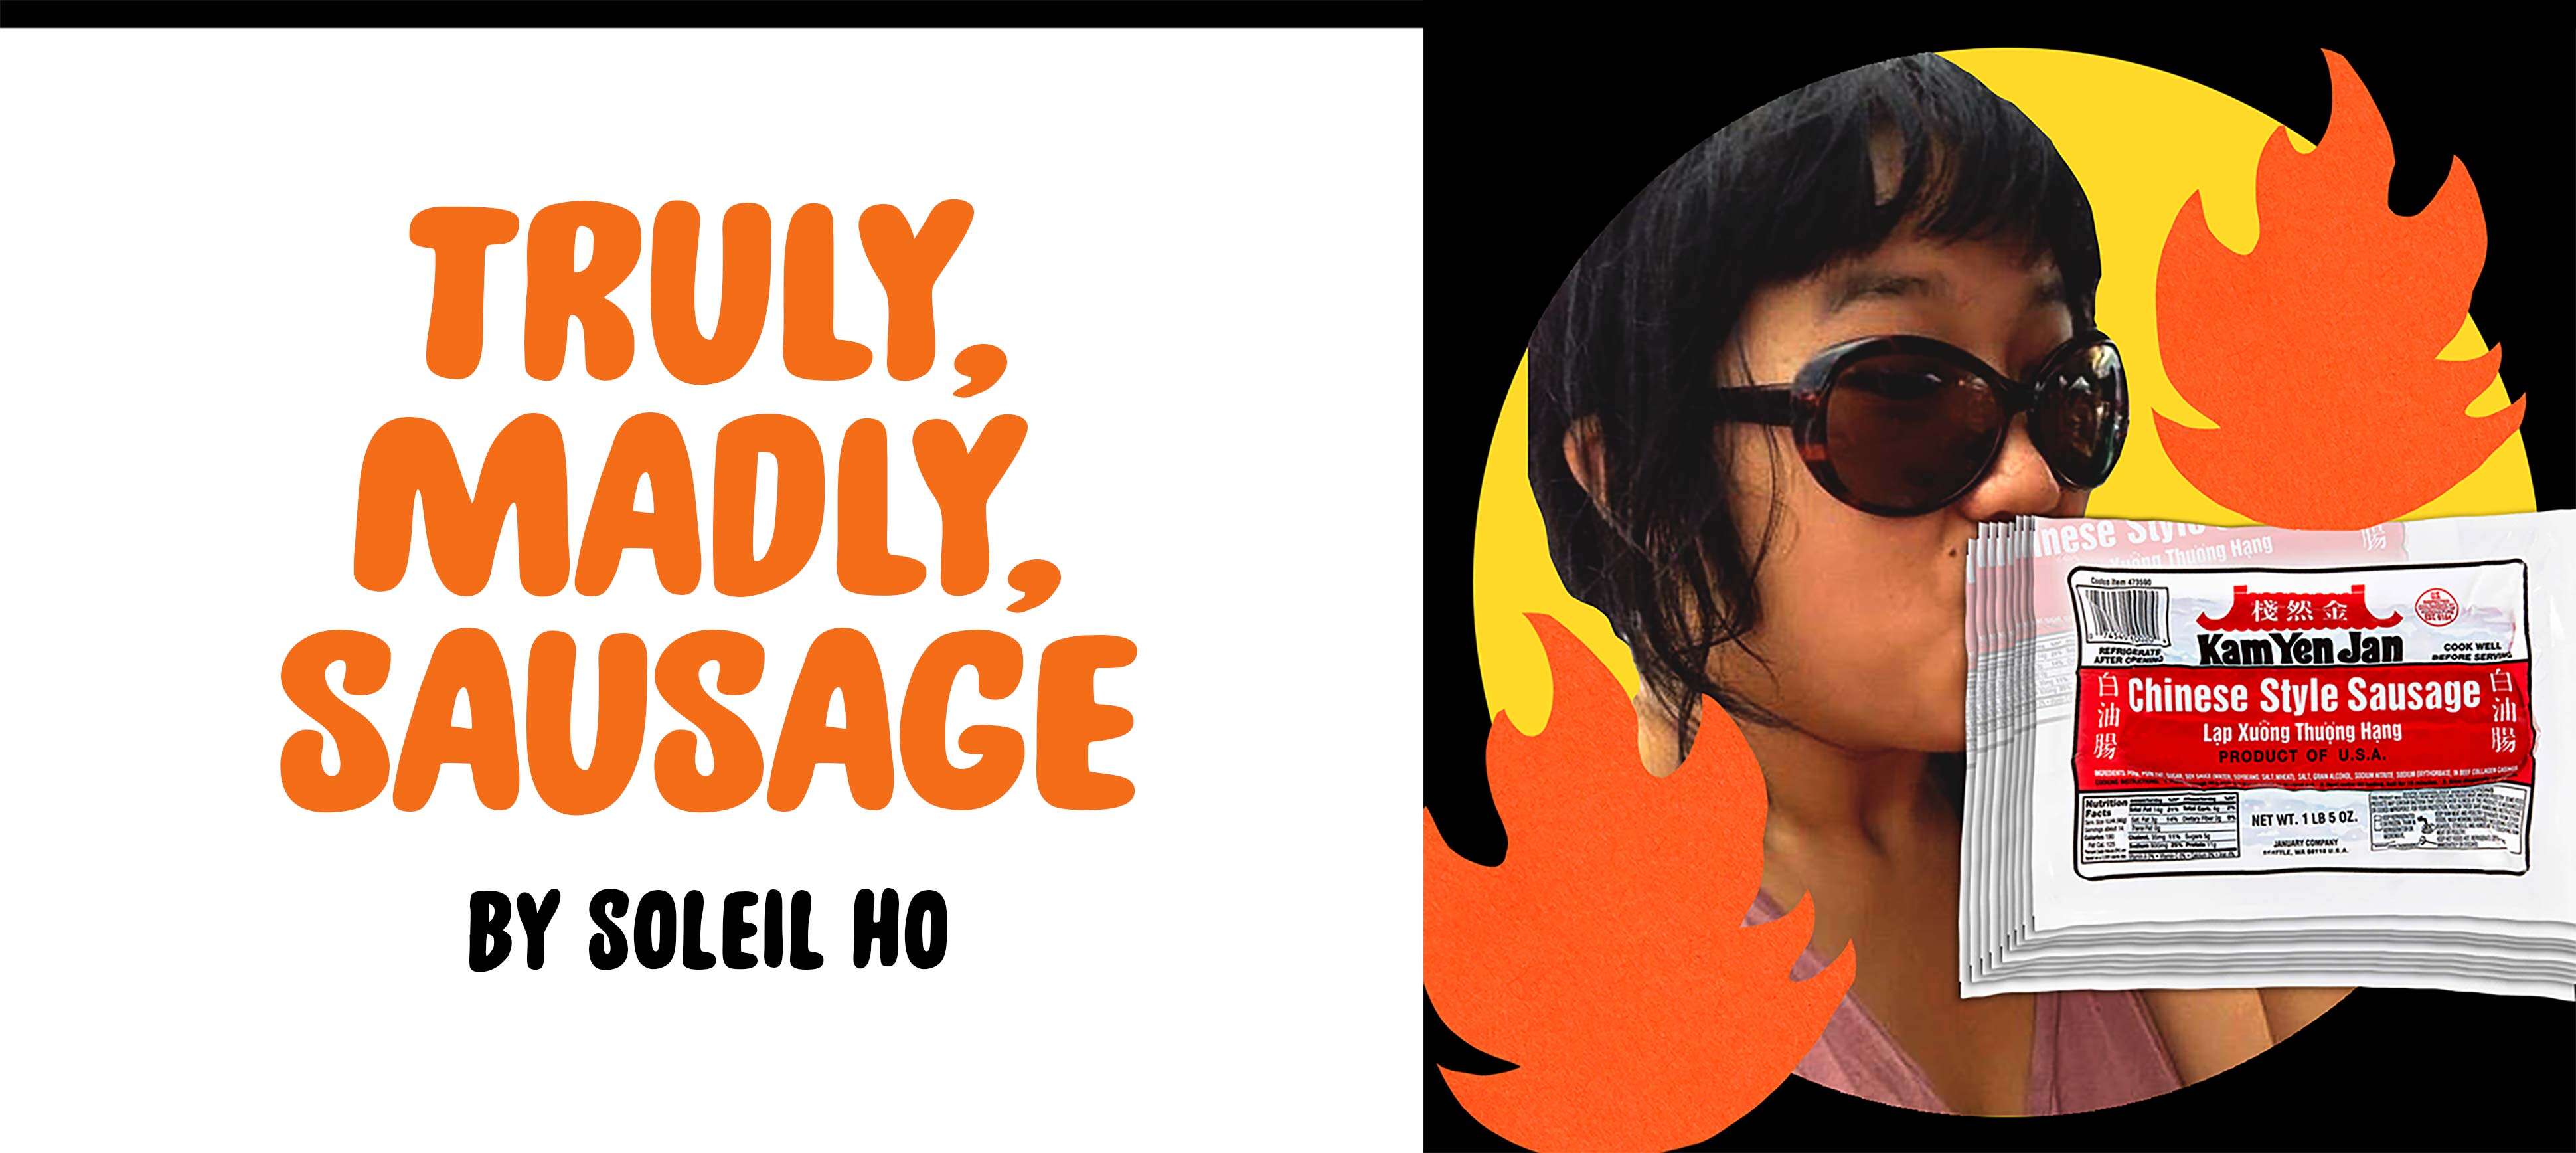 "Truly, Madly, Sausage" by Soleil Ho